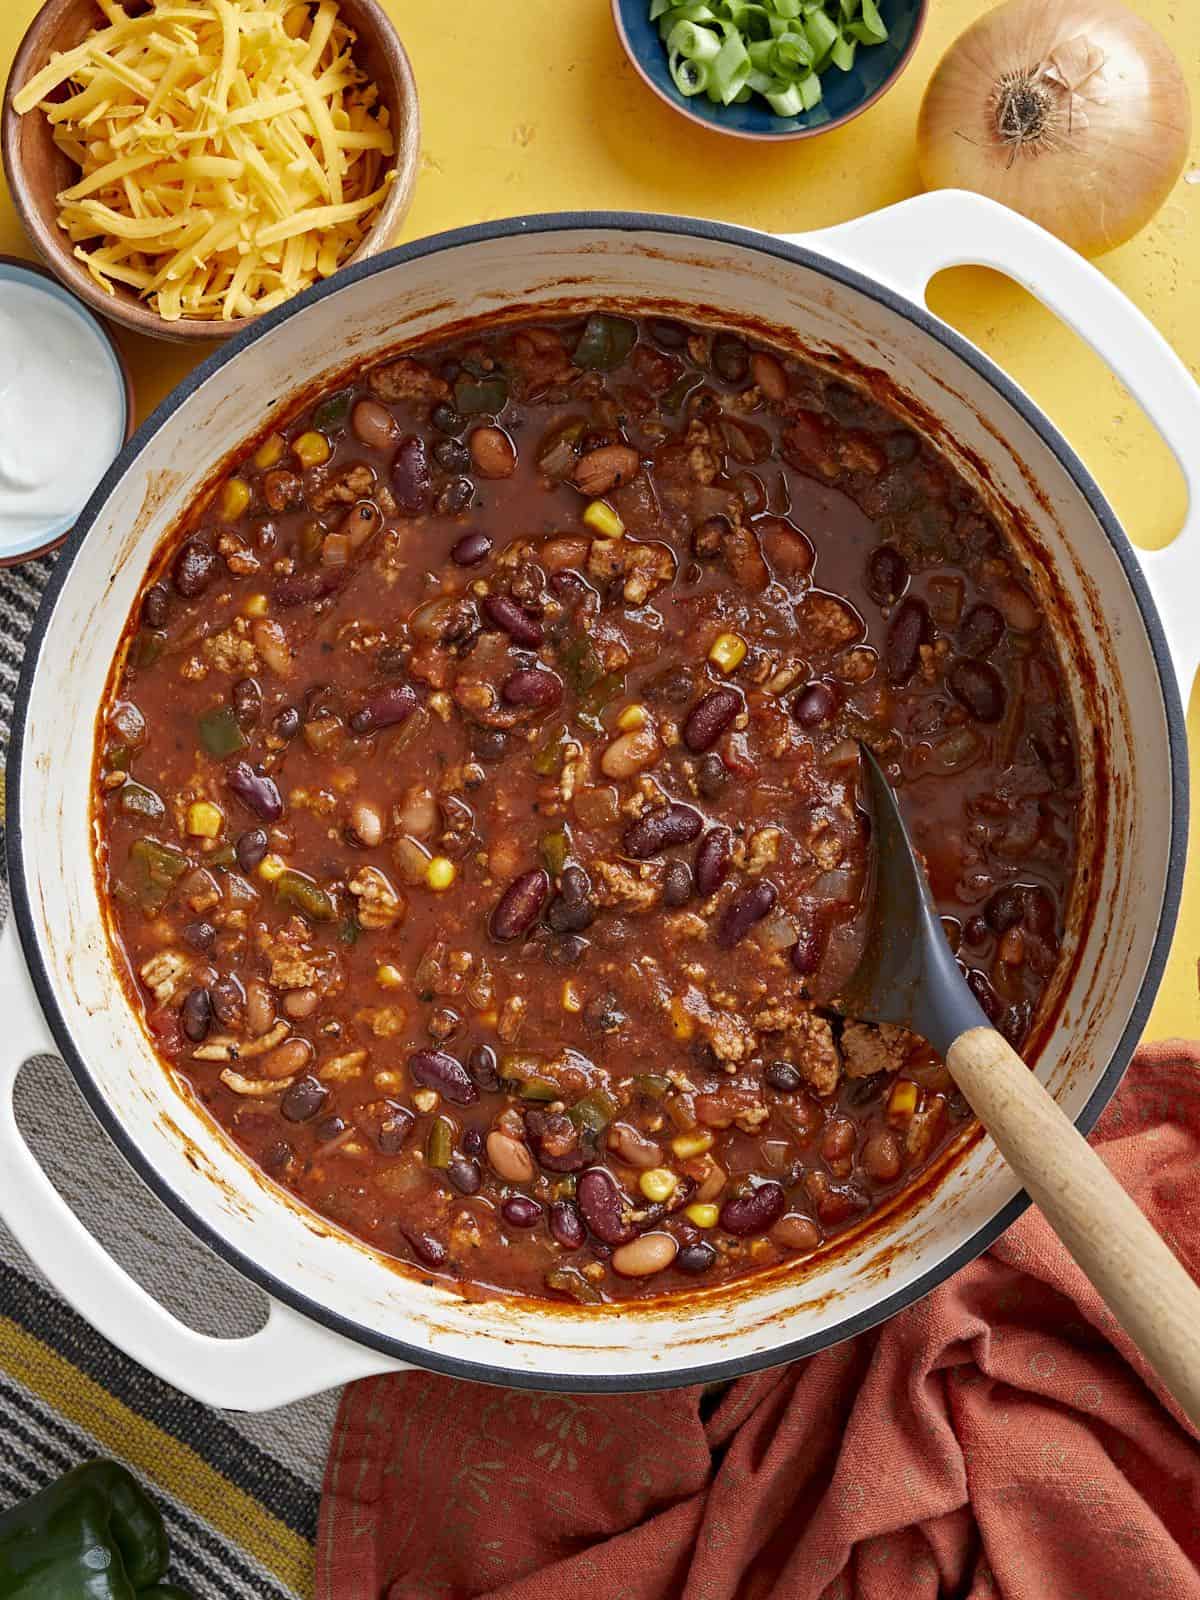 Overhead view of a pot full of turkey chili with ingredients on the sides.